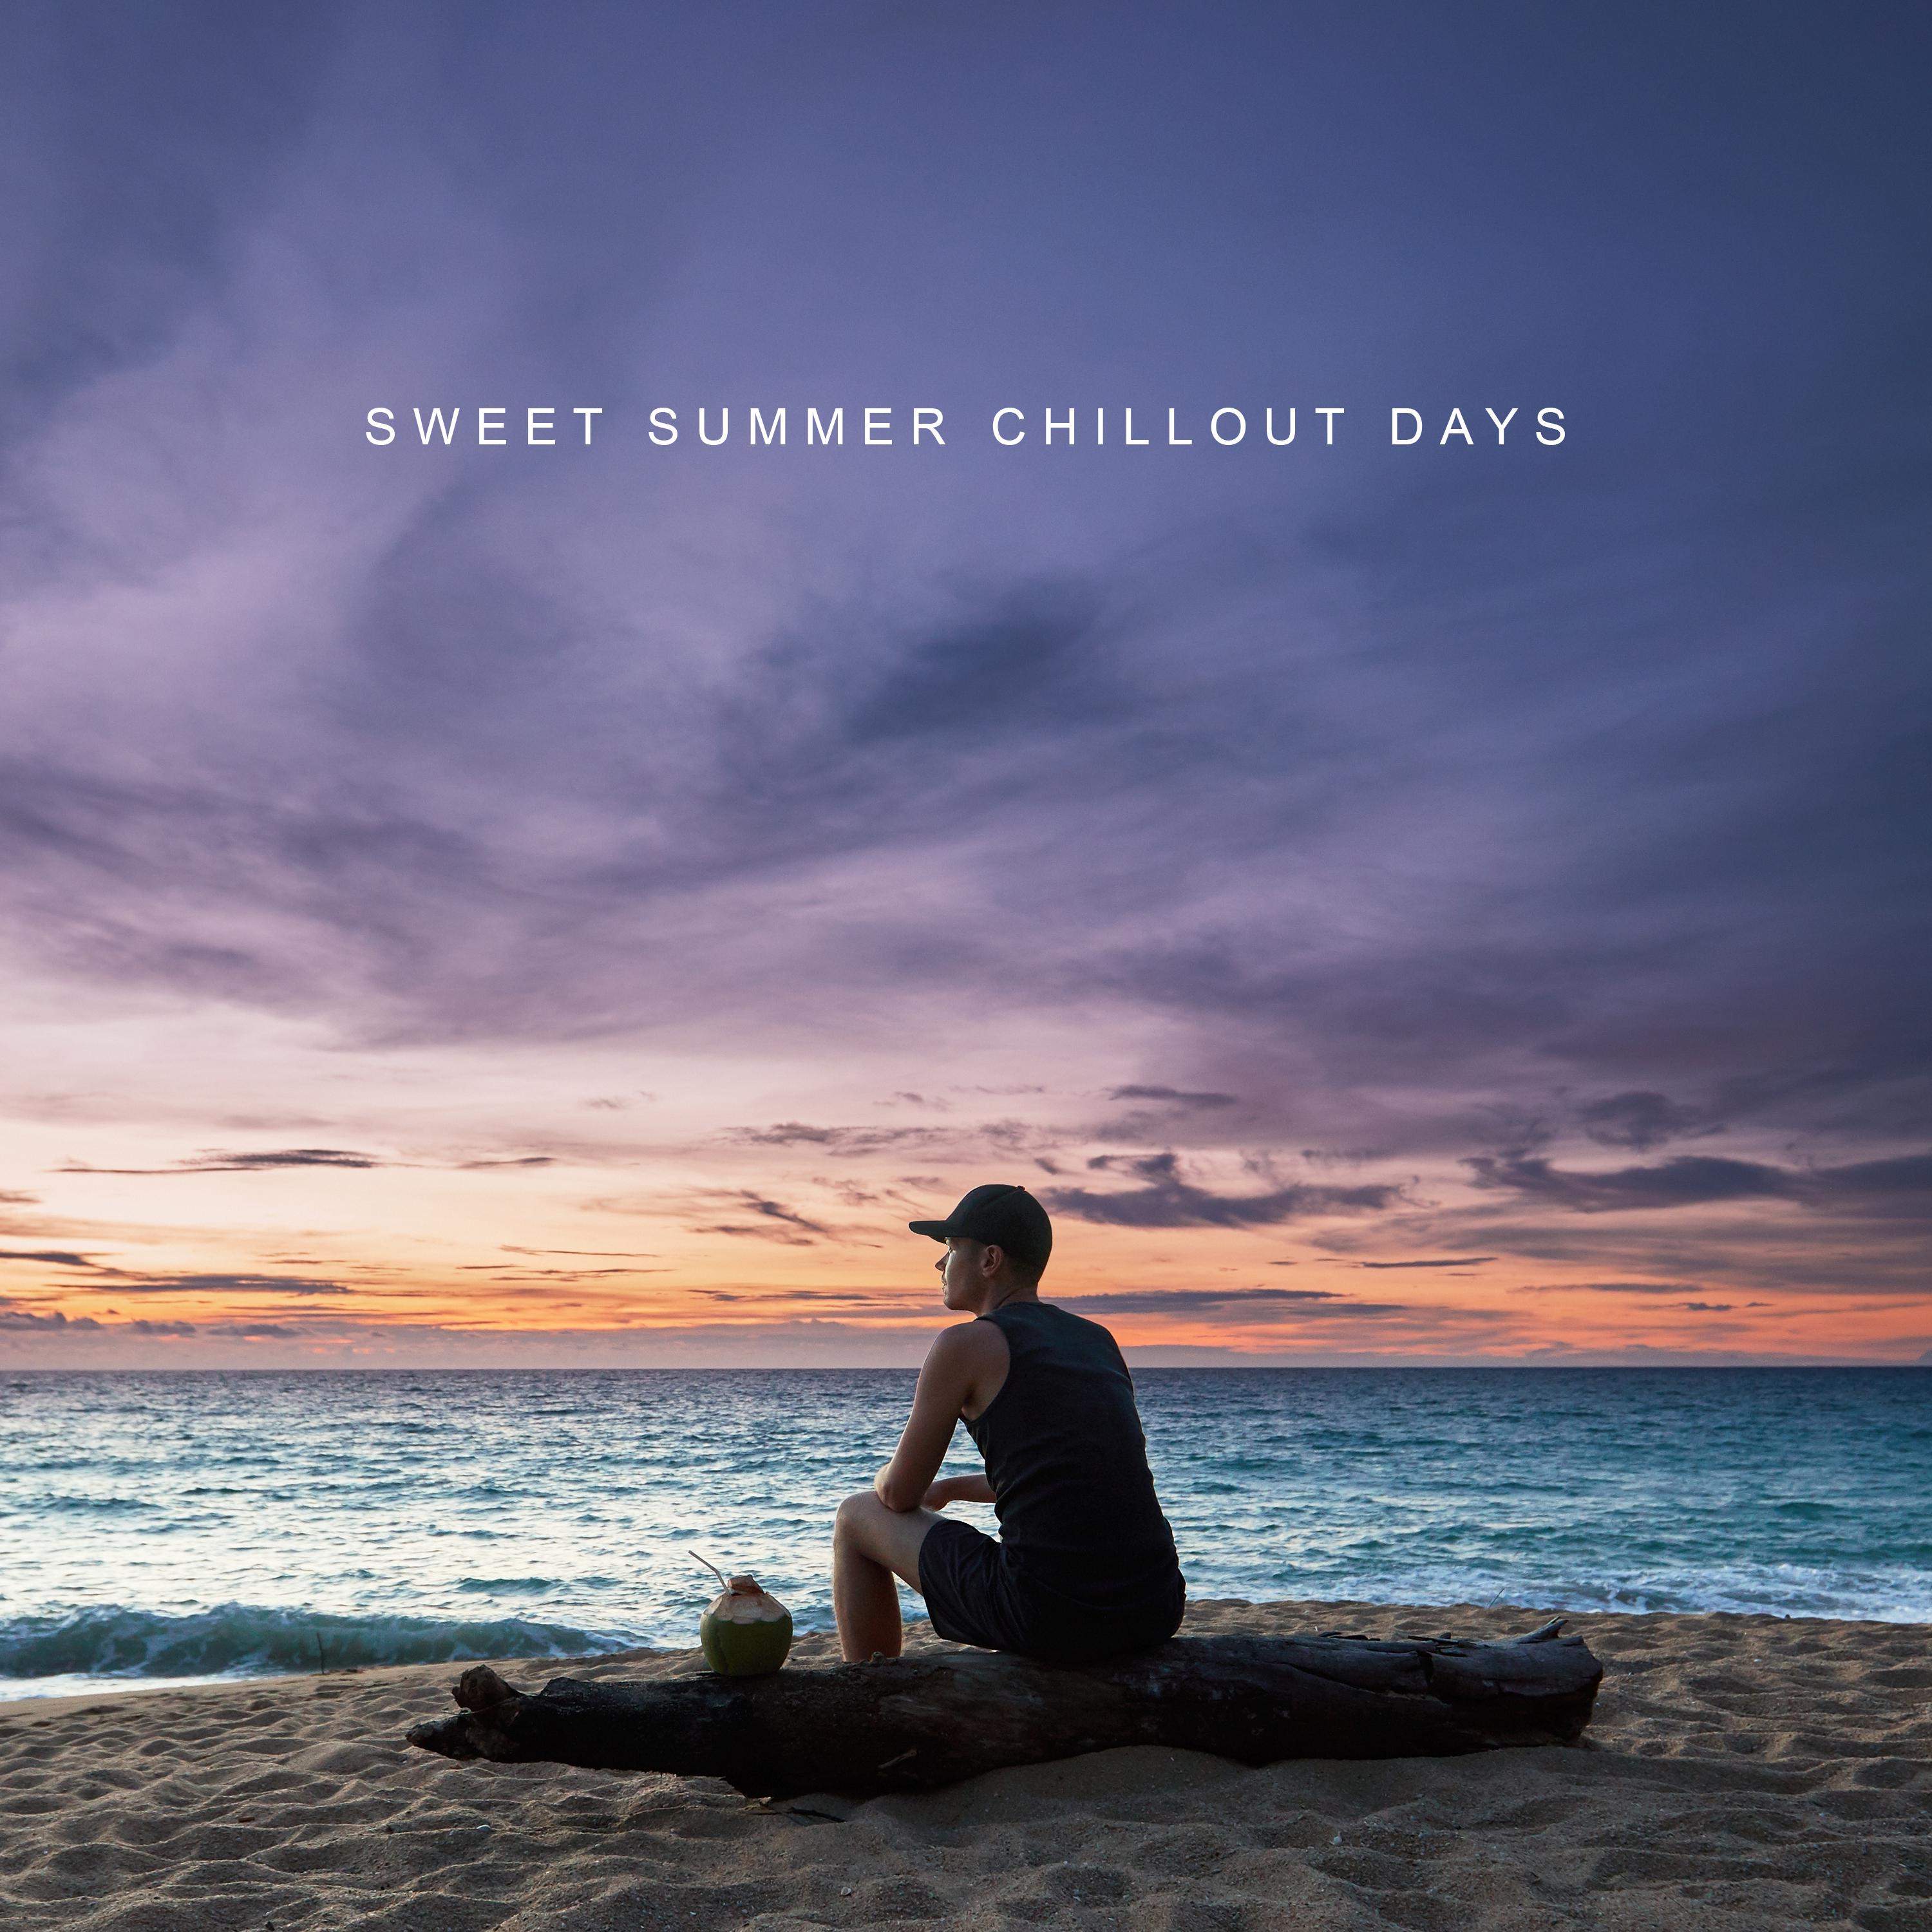 Sweet Summer Chillout Days: 2019 Top Chill Out Music Collection for Time of Vacation, Perfect Holiday Beats & Relaxing Ambient Melodies, Tropical Summer Calming & Rest